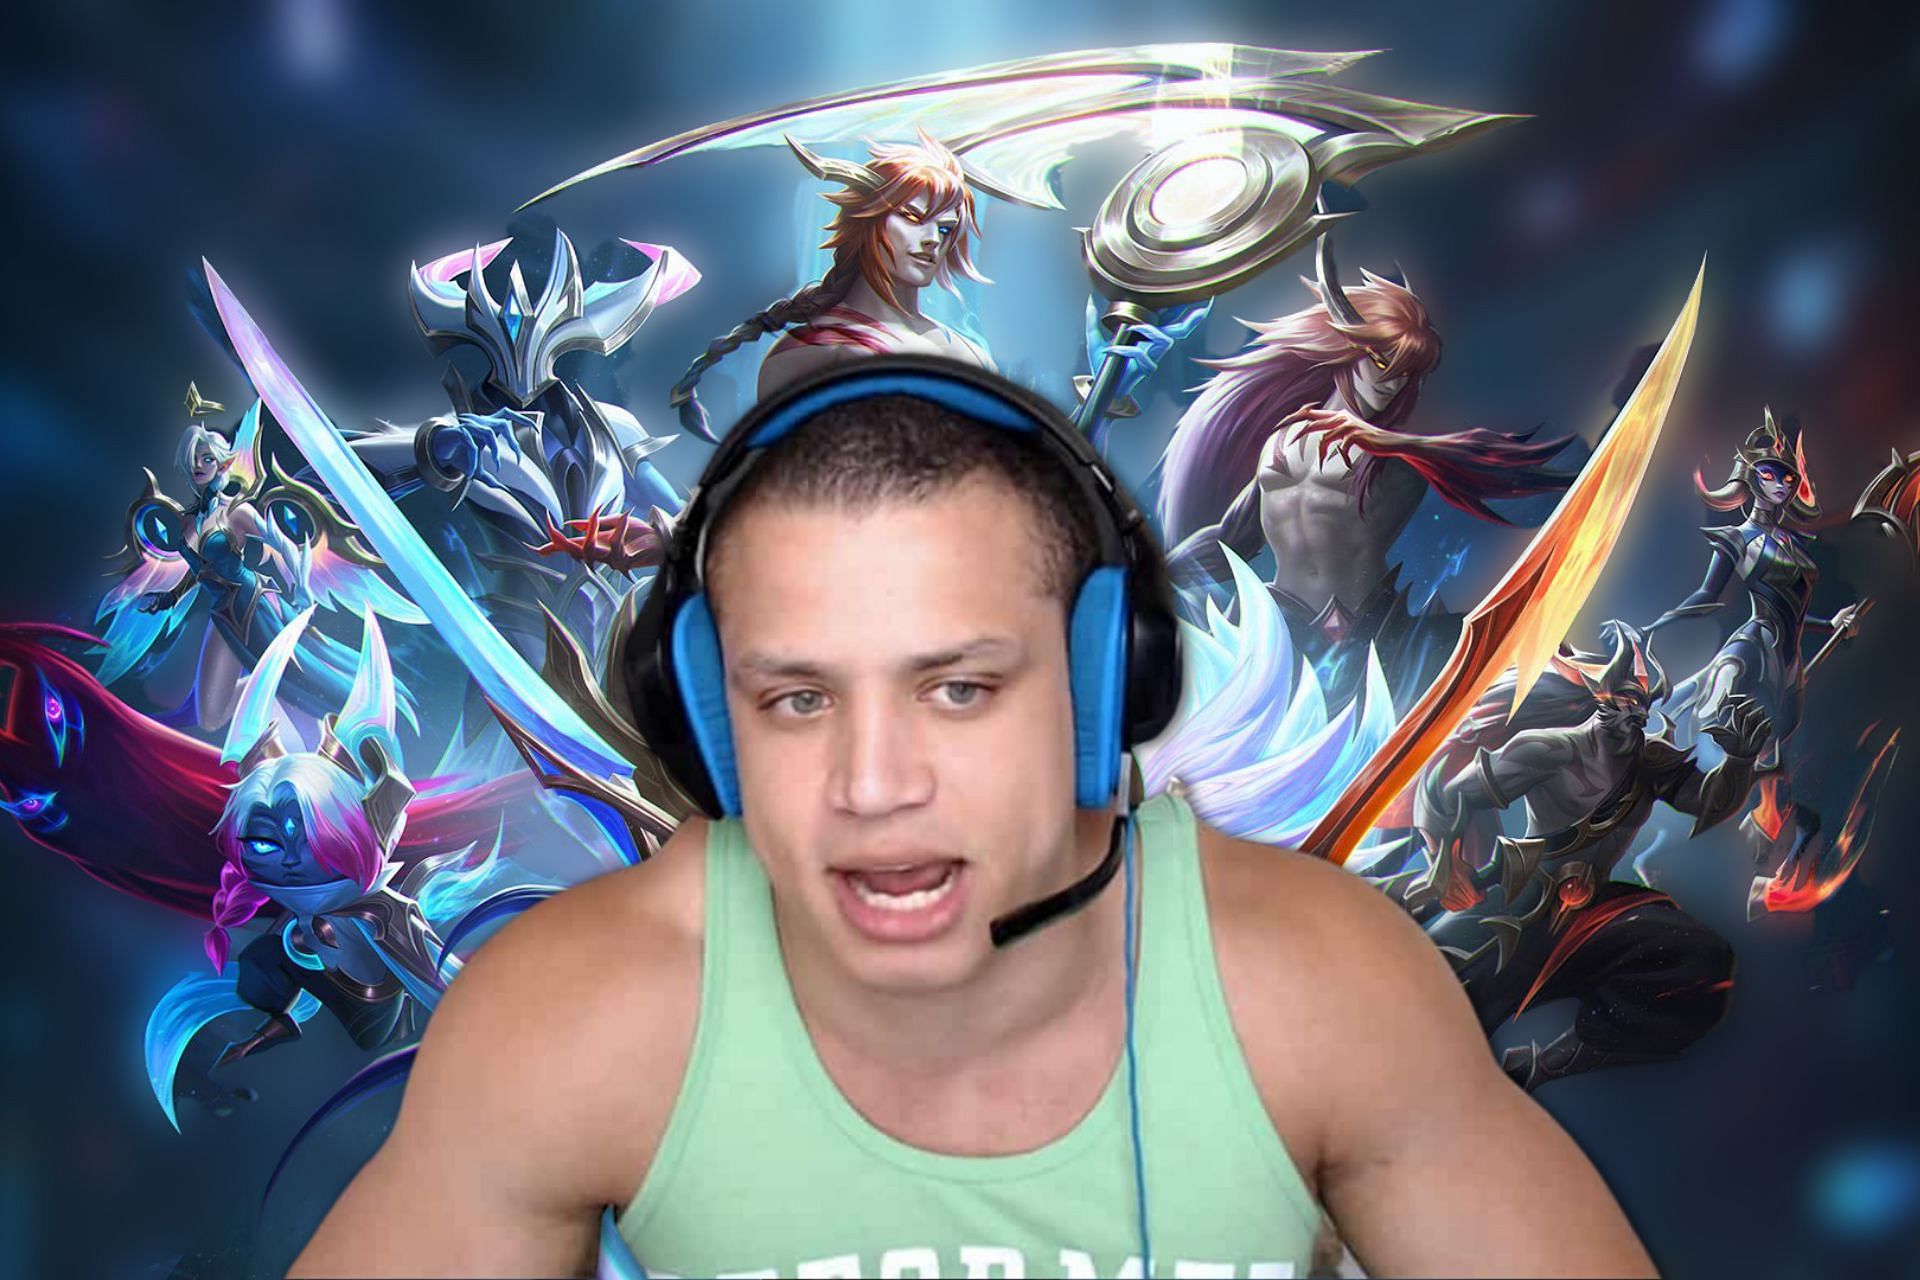 A viewer may have trolled twitch streamer Tyler1, but he took the bait and ran with it (Image via Sportskeeda)